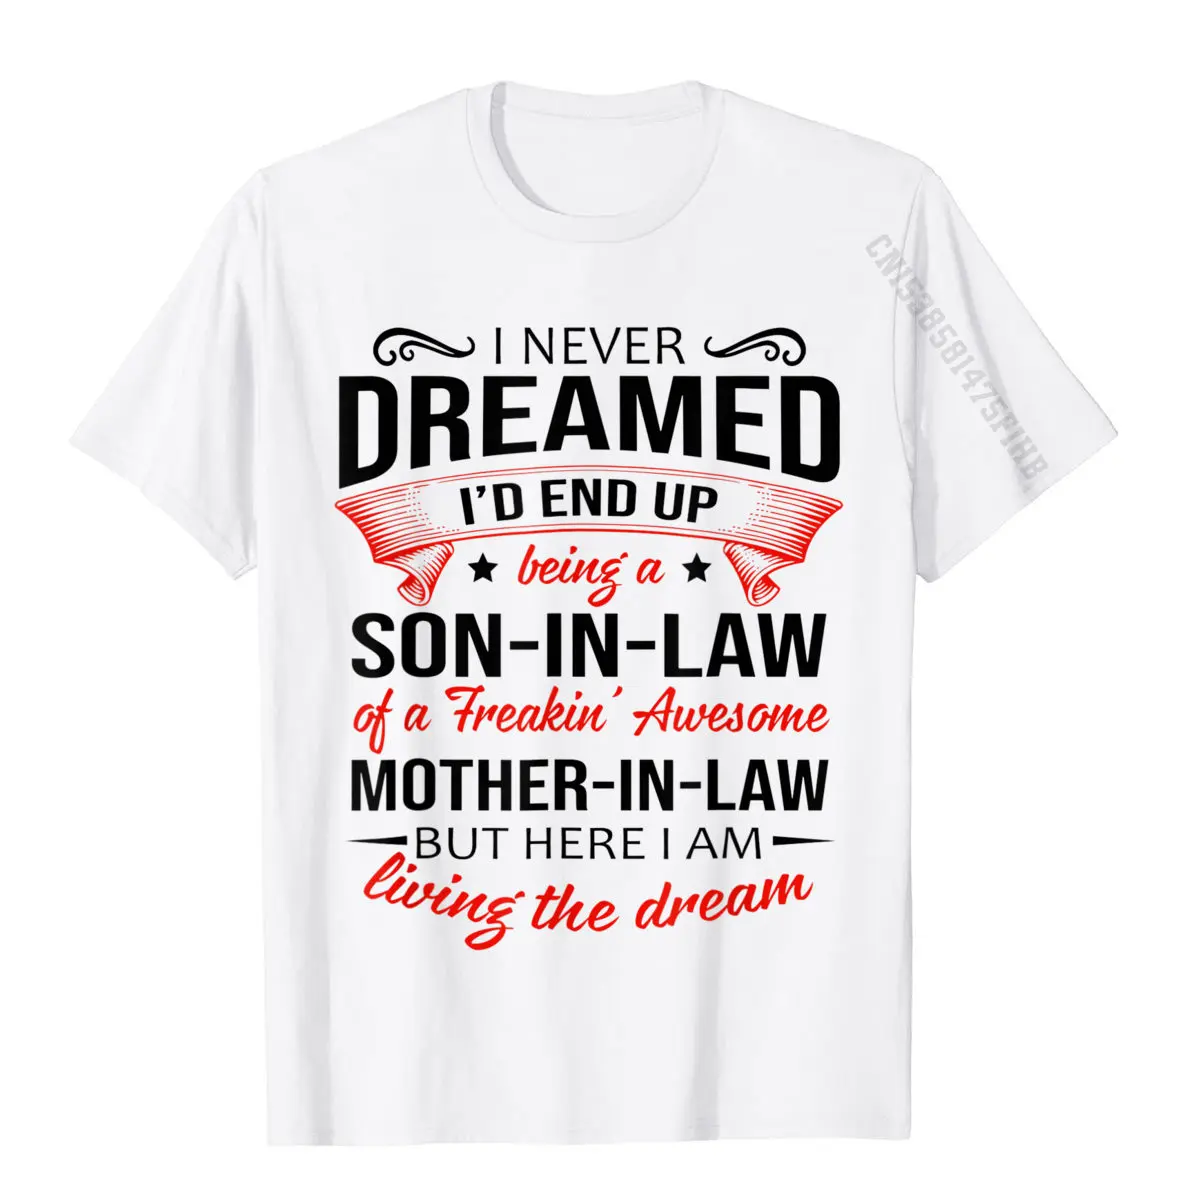 I Never Dreamed I'd End Up Being A Son-In-Law Funny Gift T-Shirt T Shirts Casual Wholesale Student Tops Shirts Casual Cotton